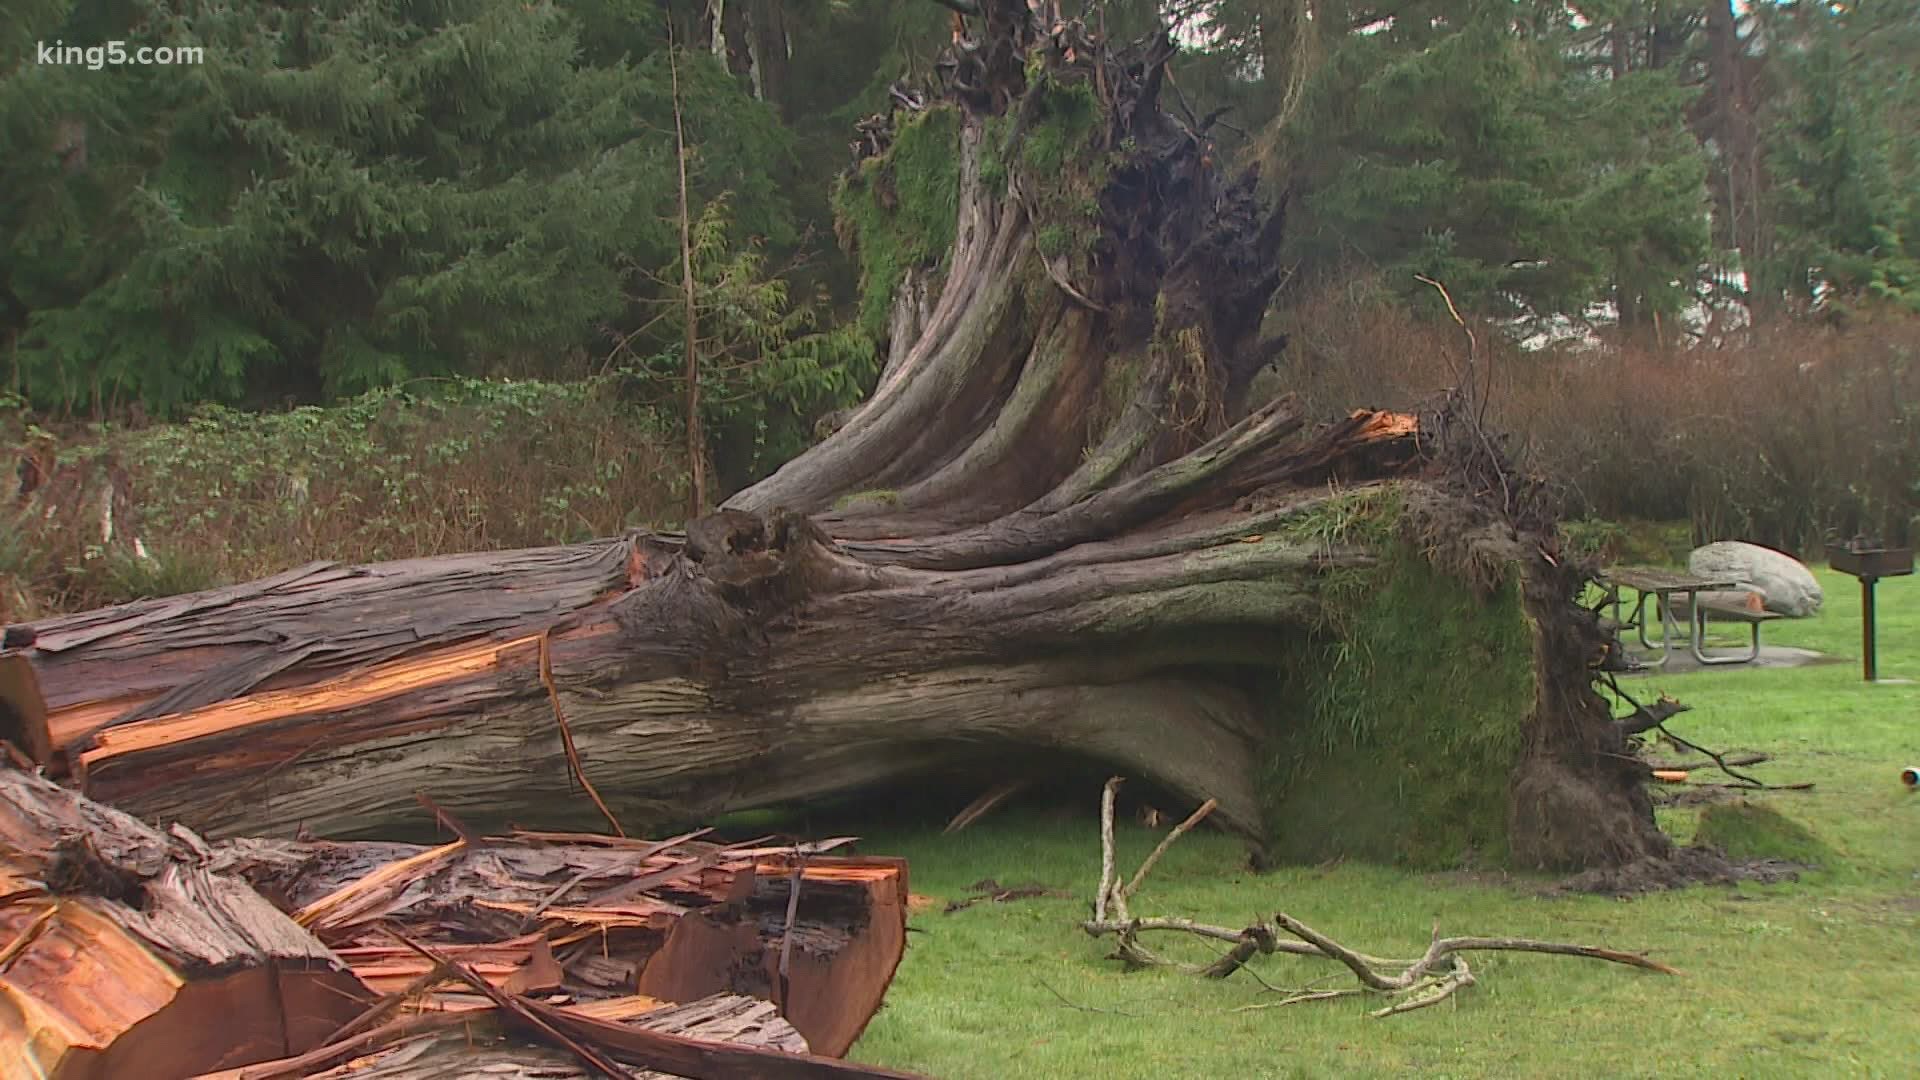 A January storm knocked down trees that need to be cleaned up before Deception Pass State Park can open to campers in April.